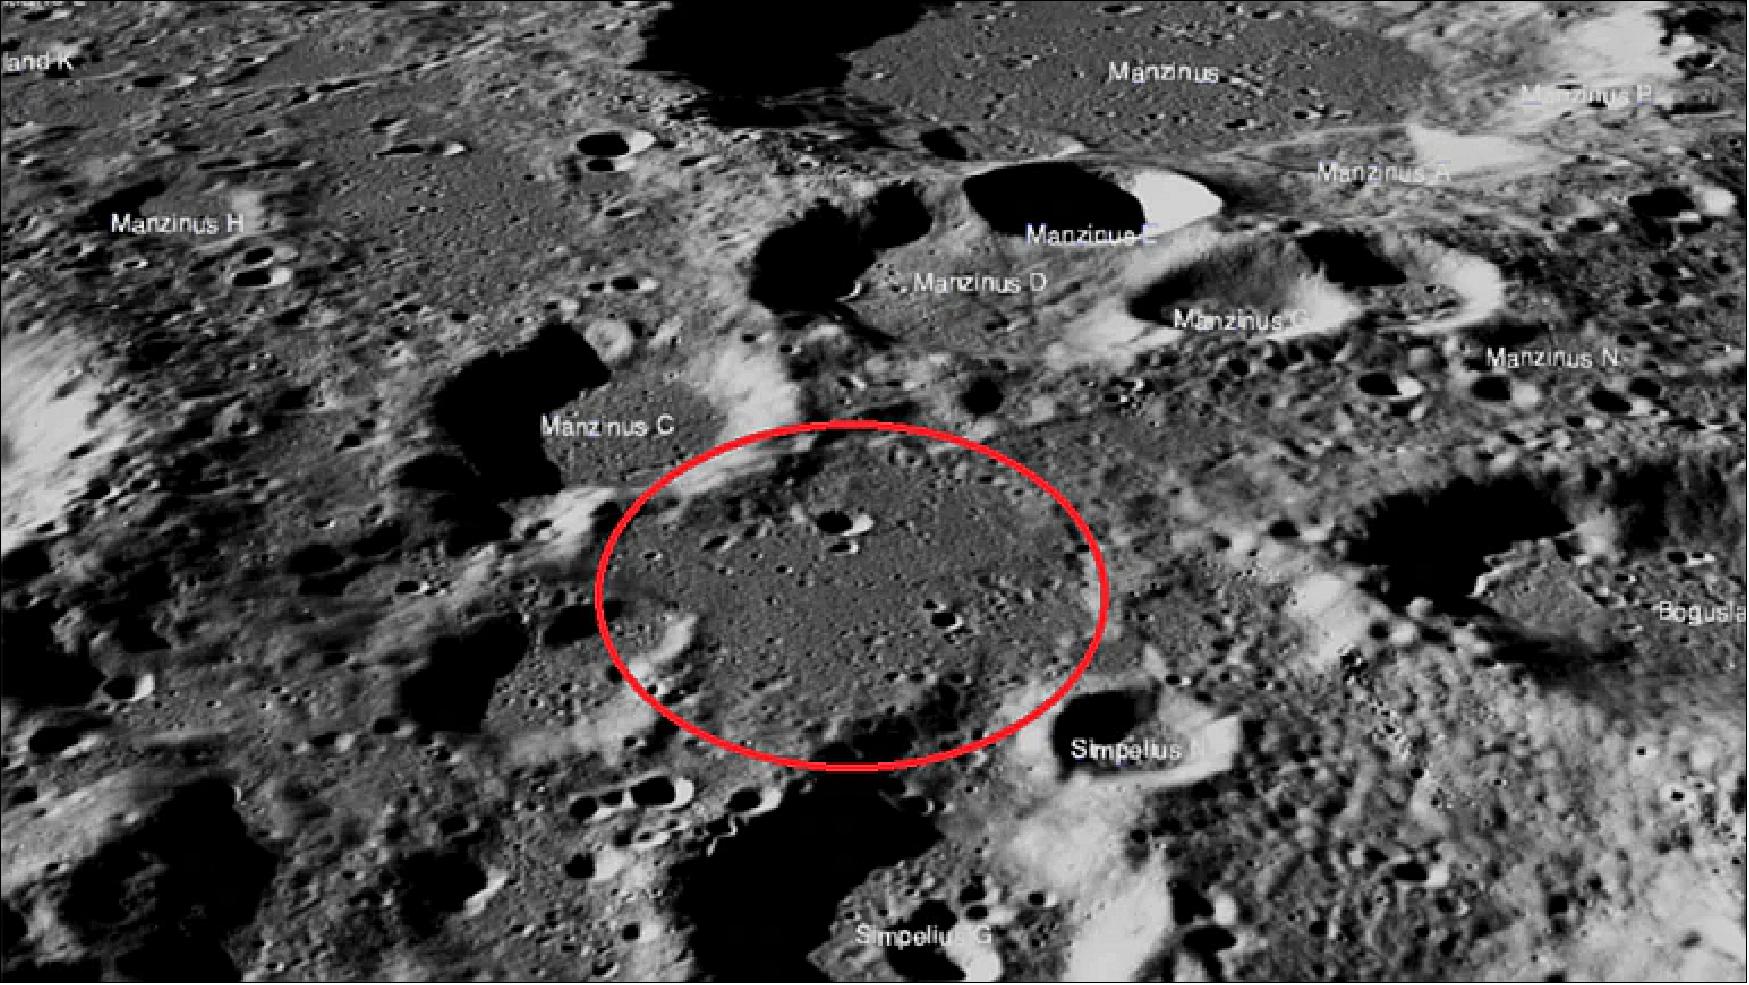 Figure 18: The Chandrayaan-2 Vikram module had attempted a soft landing on a small patch of lunar highland smooth plains between Simpelius N and Manzinus C craters before losing communication with ISRO on 7 September 2019. Vikram had a hard landing and the precise location of the spacecraft in the lunar highlands has yet to be determined, according to NASA (image credit: NASA)